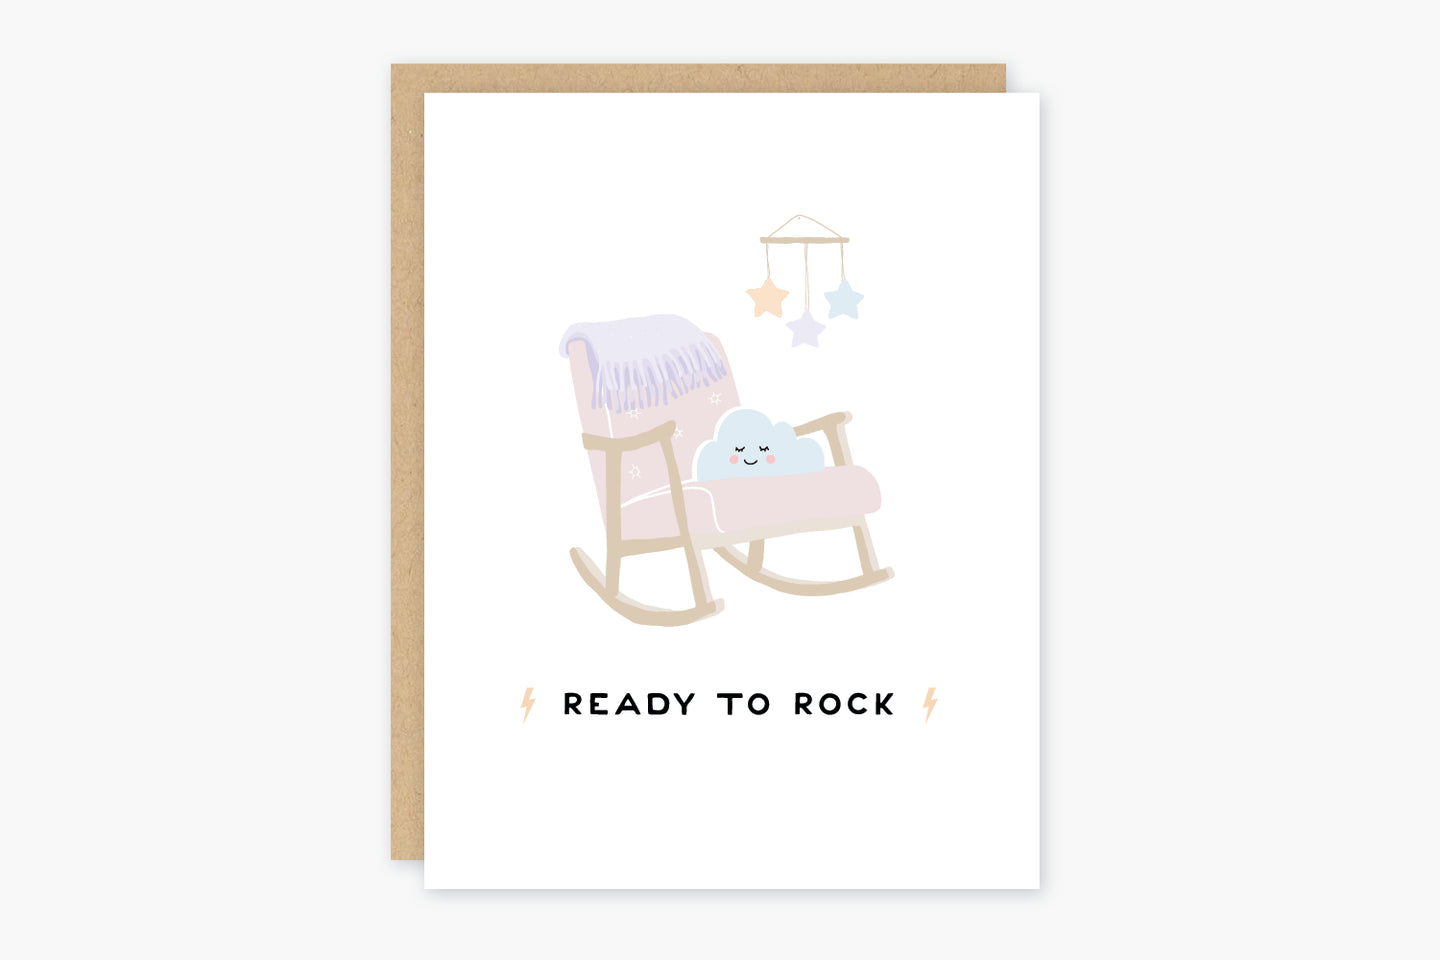 Welcome, Baby! Card, multiple styles